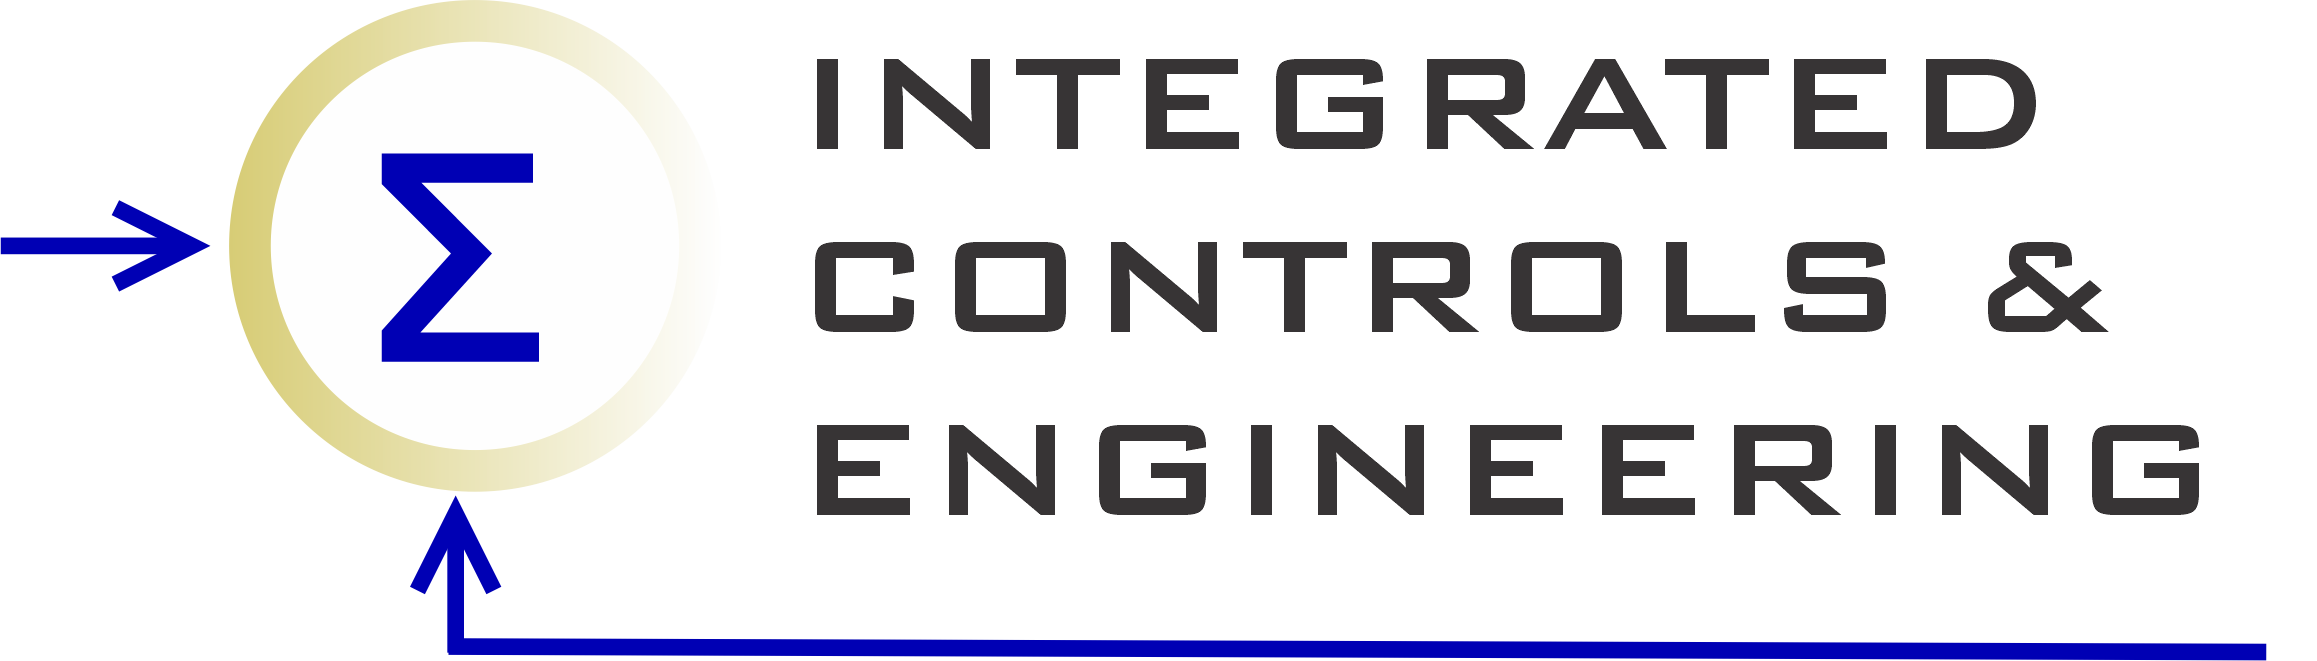 The logo for Integrated Controls and Engineering